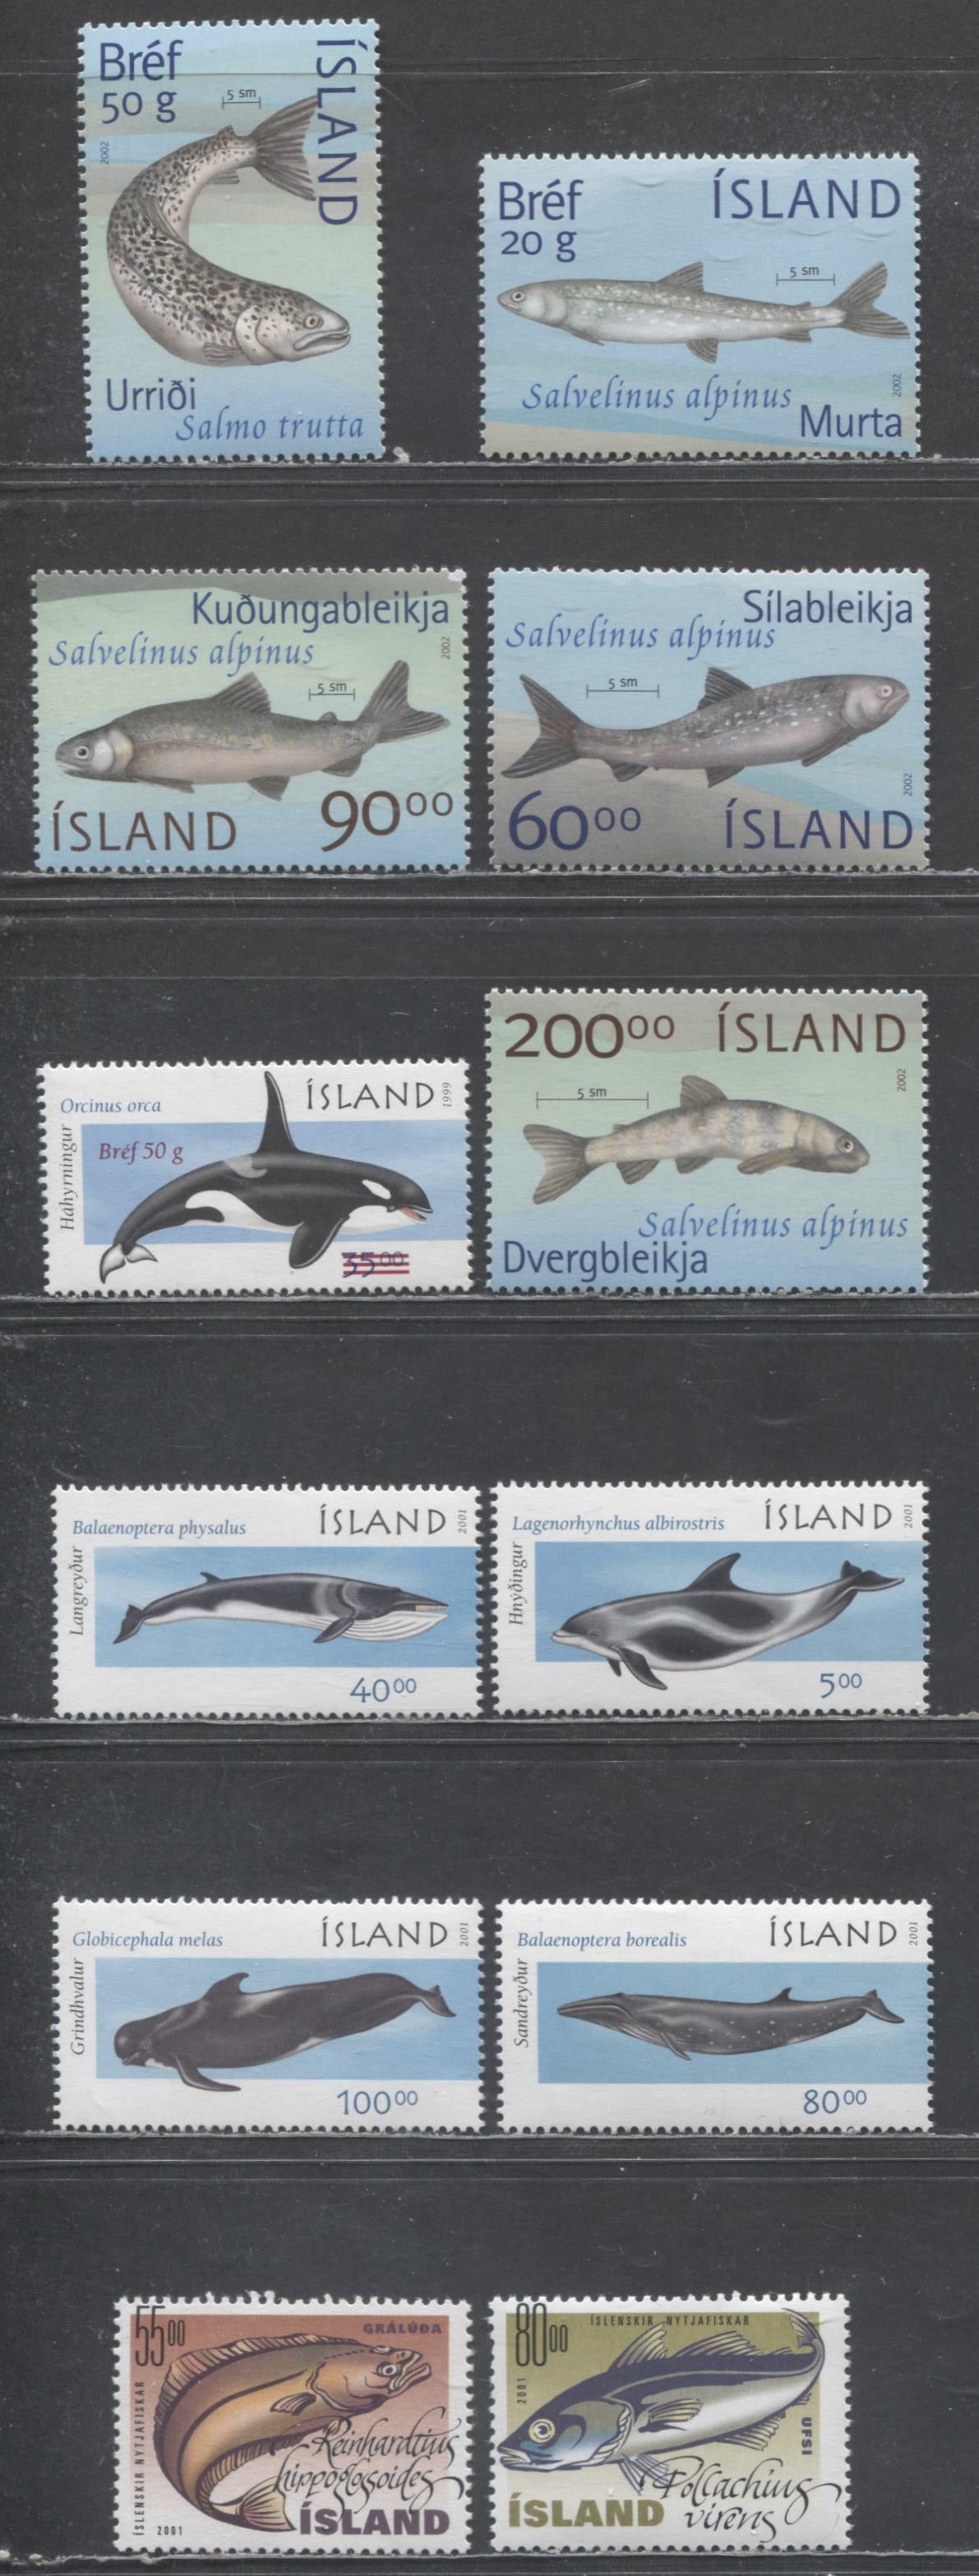 Lot 49 Iceland SC#928/974 2001-2002 Fish - Marine Mammals & Surcharge Issues, 12 VFNH Singles, Click on Listing to See ALL Pictures, 2017 Scott Cat. $27.8